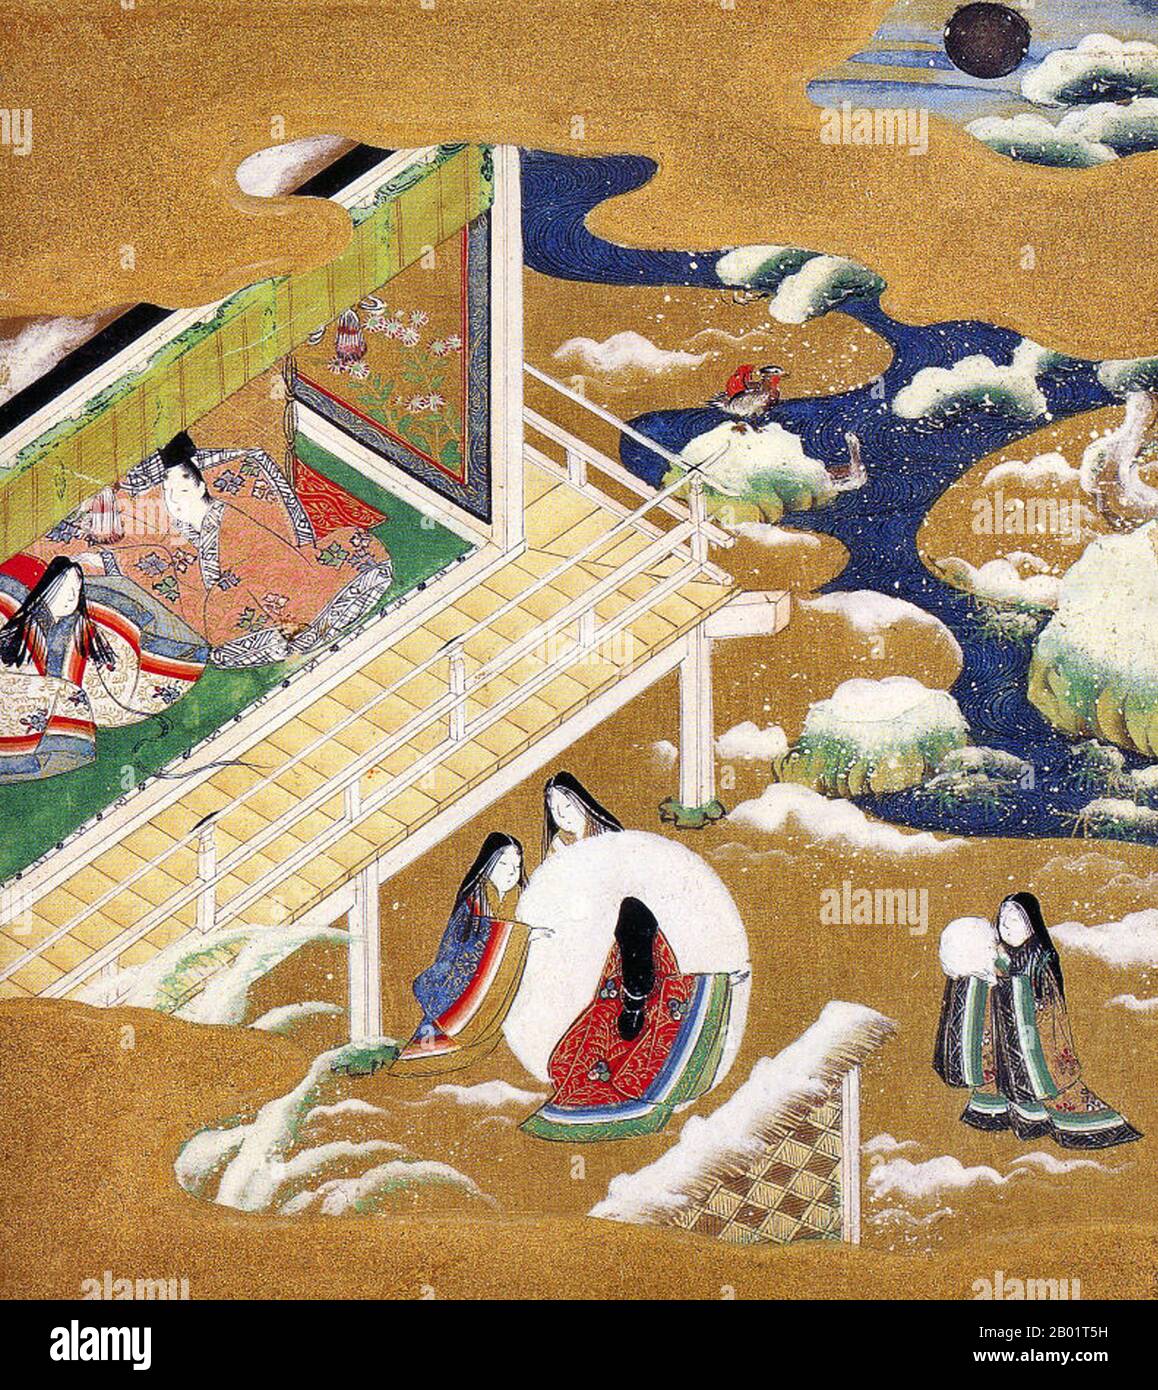 Japan: 'Chapter 20 - Asagao' from the 'Tale of Genji'. Painting by Tosa Mitsuoki (23 October 1617 - 25 September 1691), late 17th century.  The Tale of Genji (Genji Monogatari) is a classic work of Japanese literature attributed to the Japanese noblewoman Murasaki Shikibu in the early 11th century, around the peak of the Heian period.  It is sometimes called the world's first novel, the first modern novel, the first psychological novel or the first novel still to be considered a classic. Notably, the novel also illustrates a unique depiction of the livelihoods of Heian period high courtiers. Stock Photo